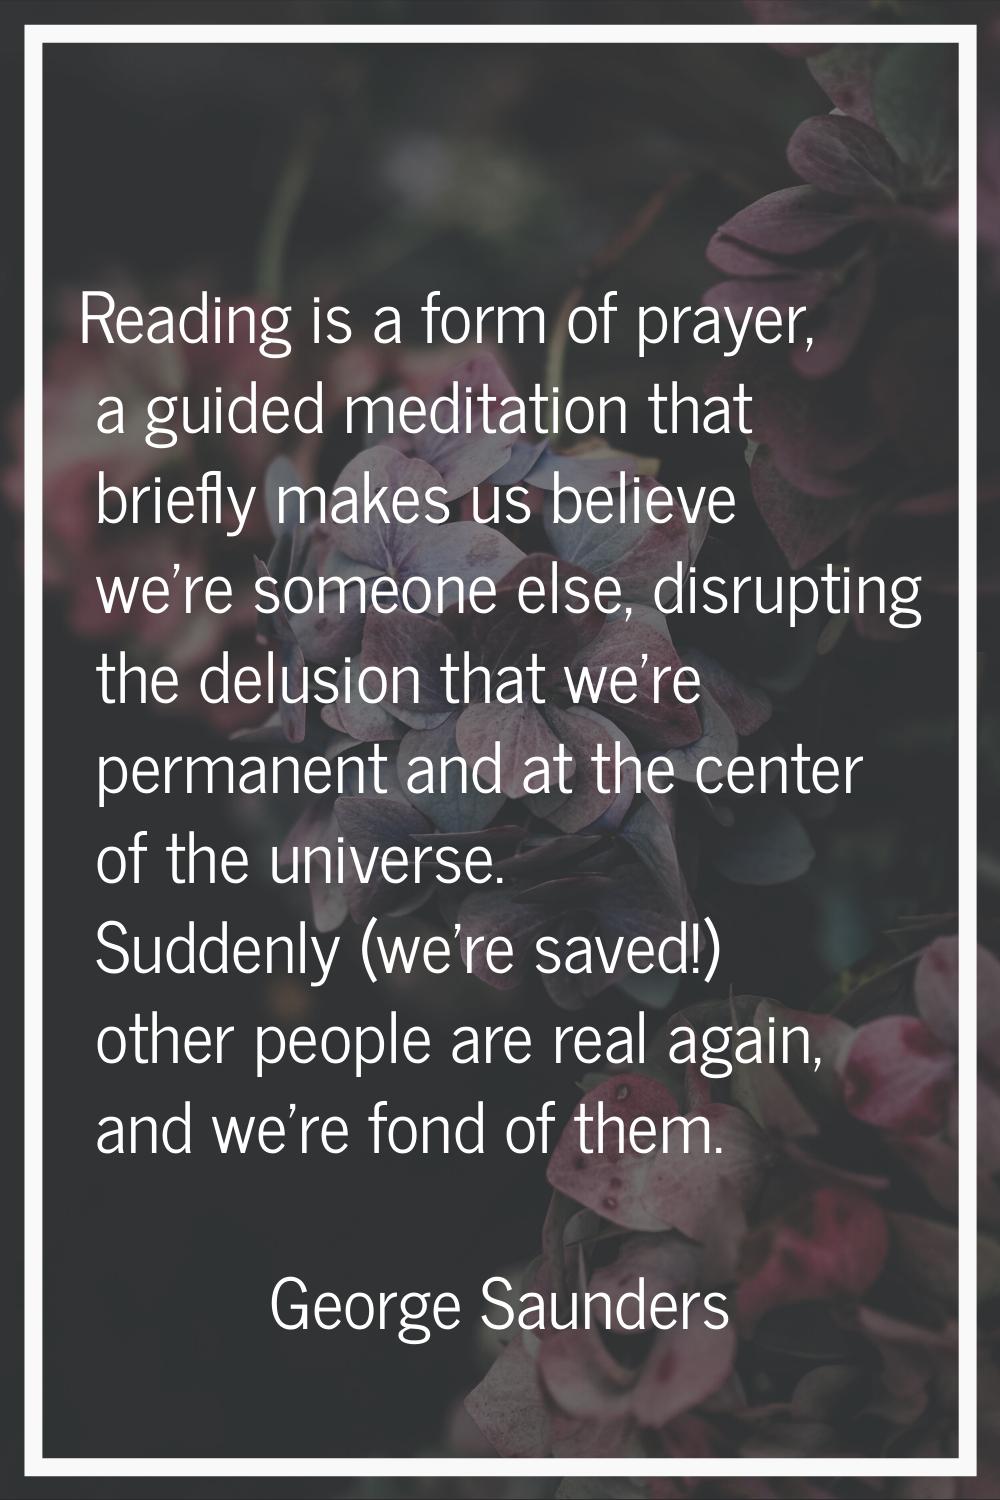 Reading is a form of prayer, a guided meditation that briefly makes us believe we're someone else, 